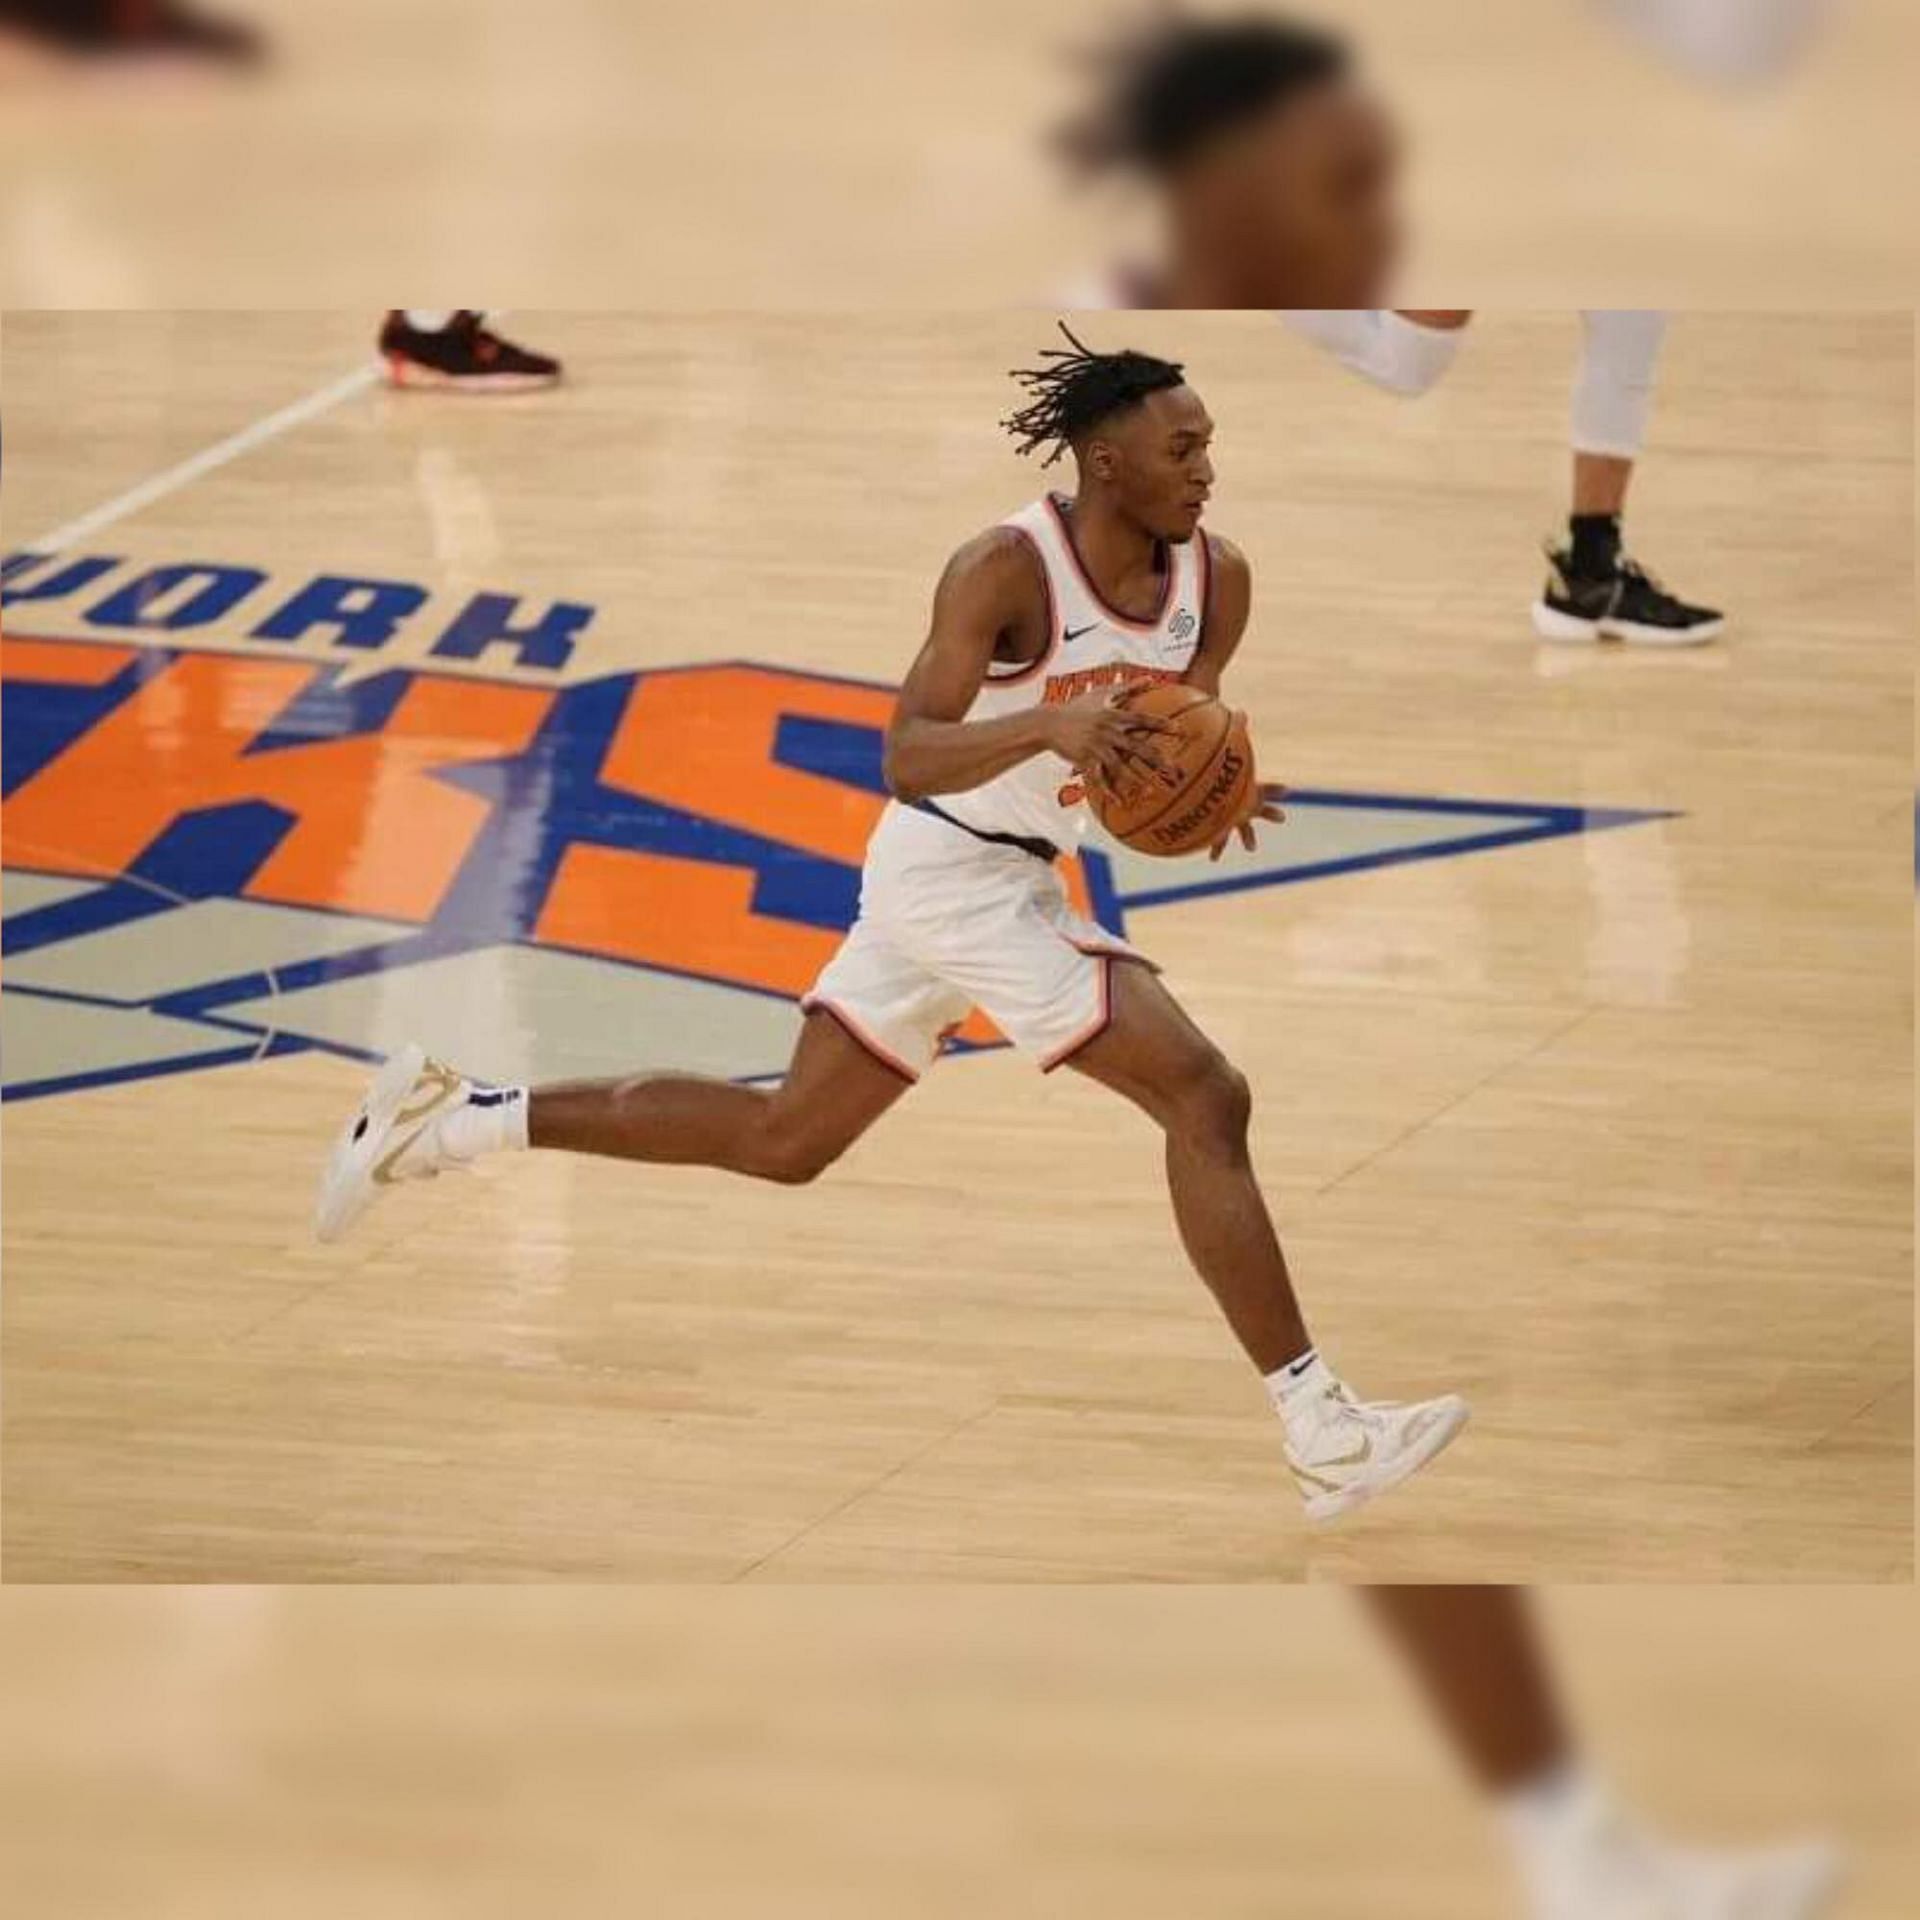 Immanuel Quickley will play a key role for the New York Knicks as a sixth man.